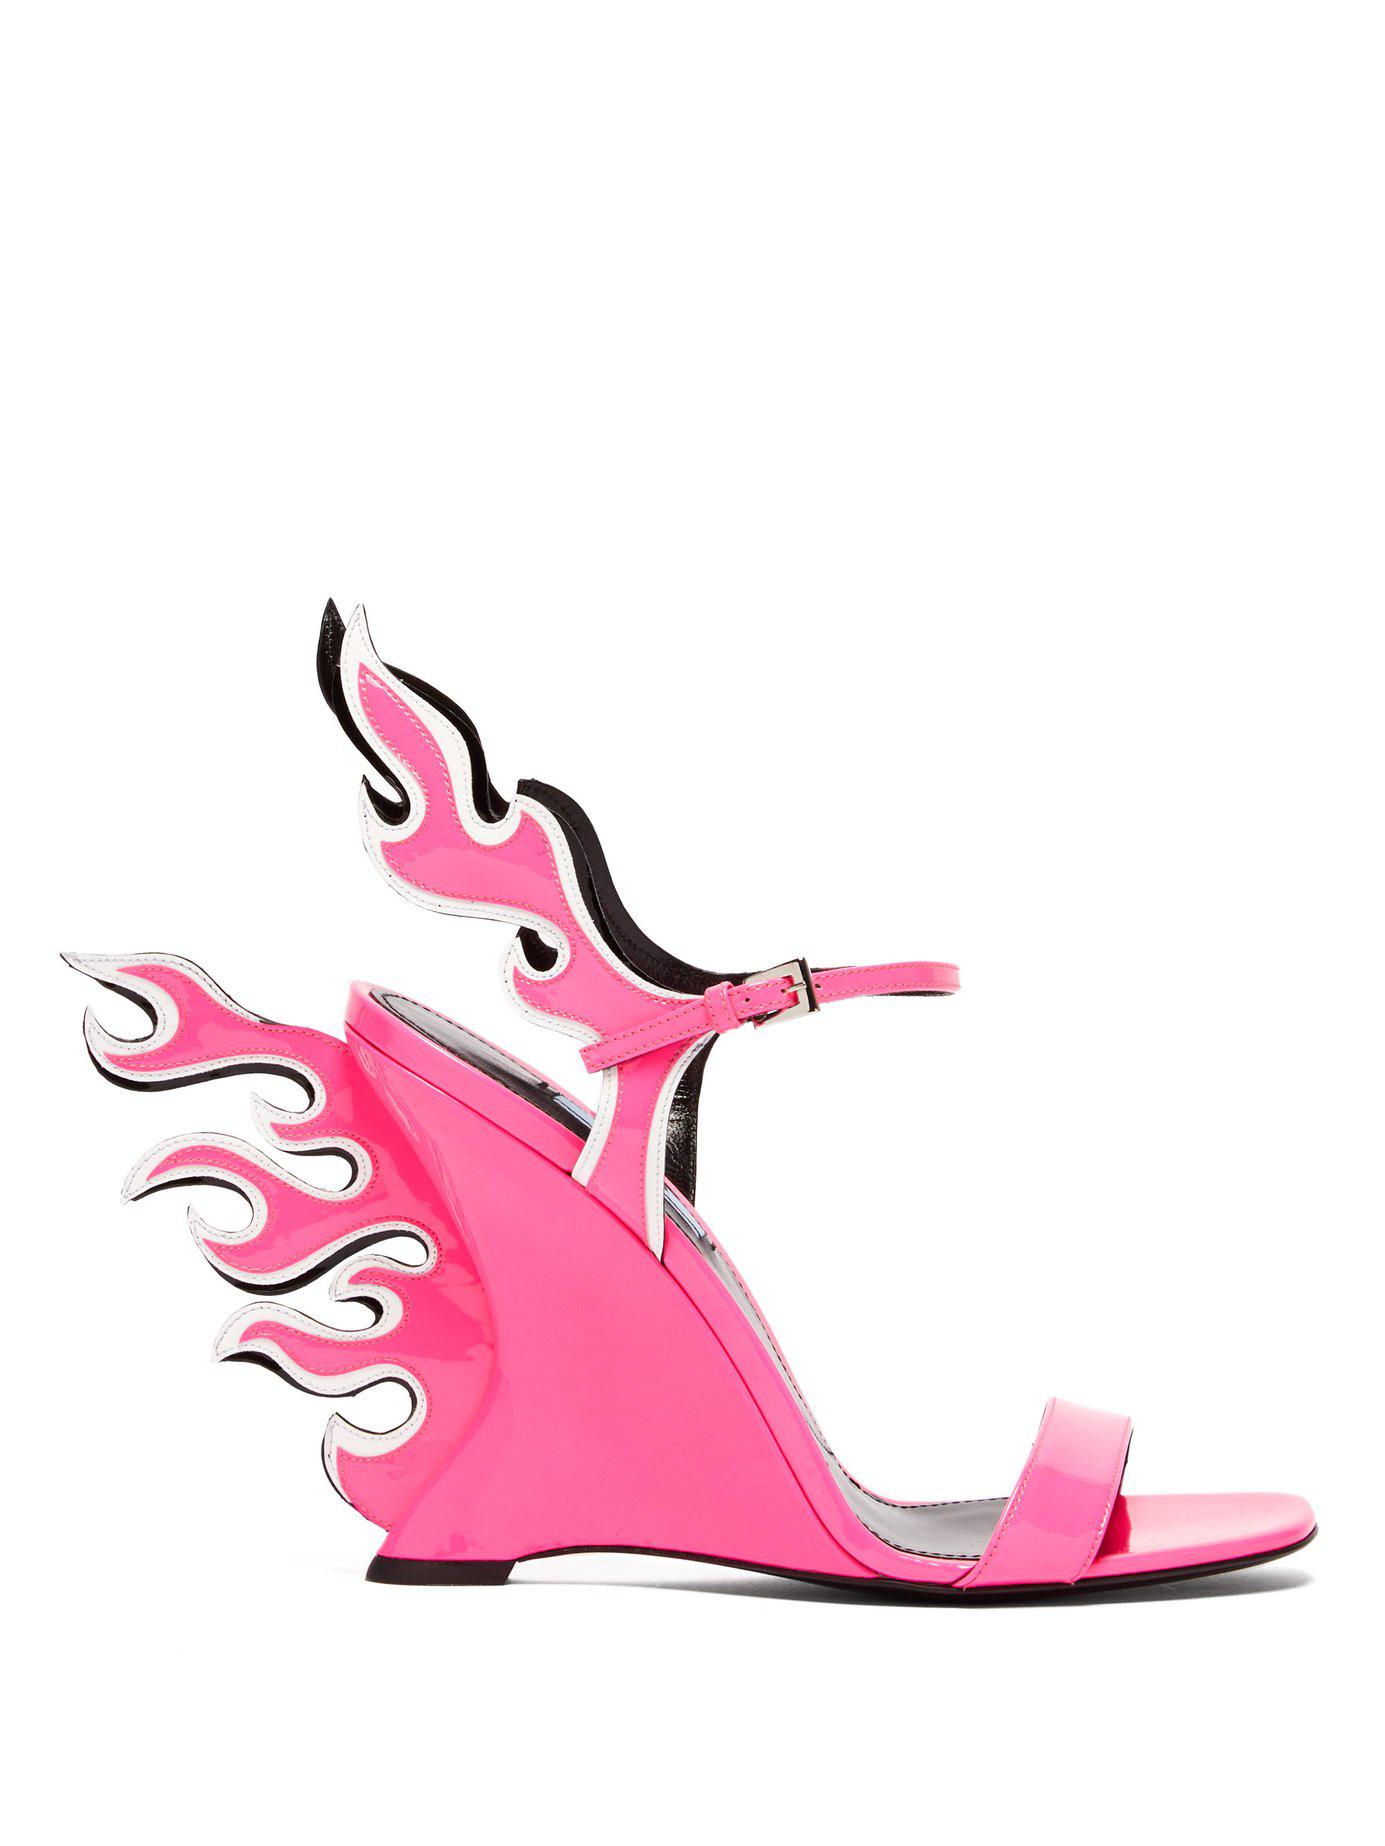 Prada Leather Flame Wedge Sandals in Pink | Lyst